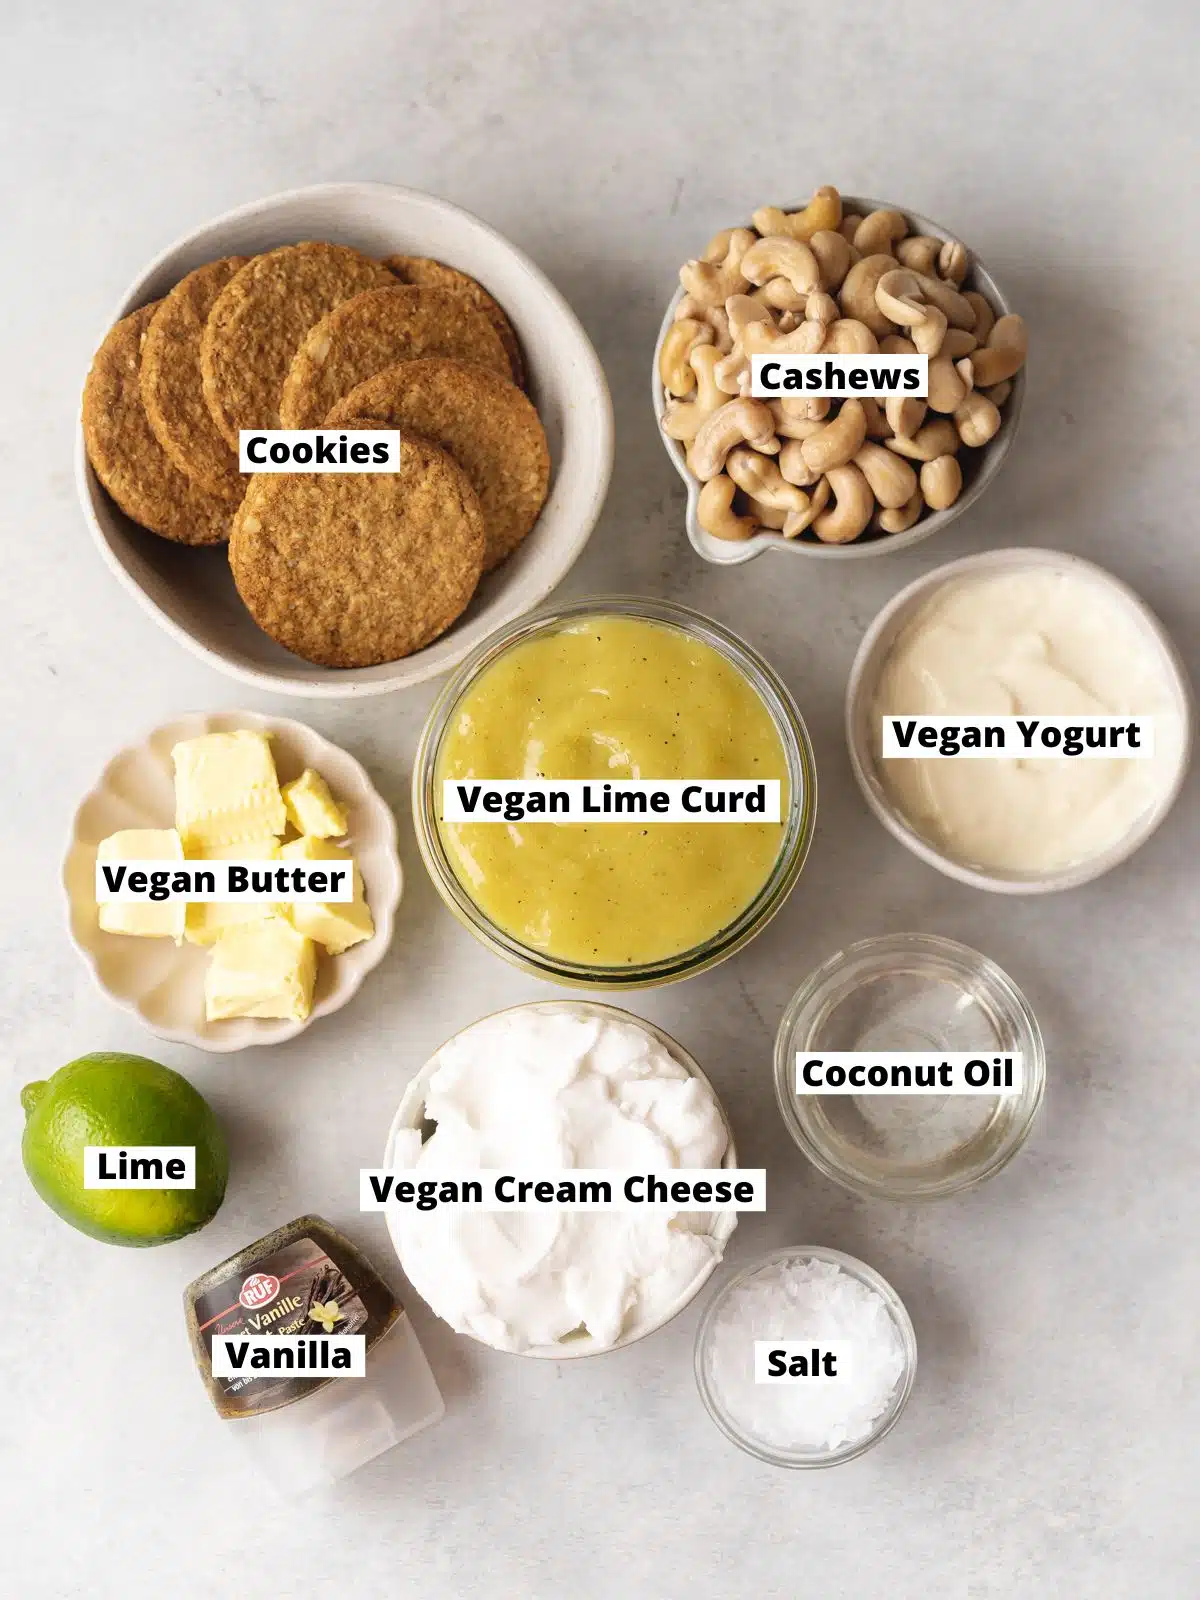 ingredients to make vegan lime cheesecake measured out in small bowls on a gray surface.